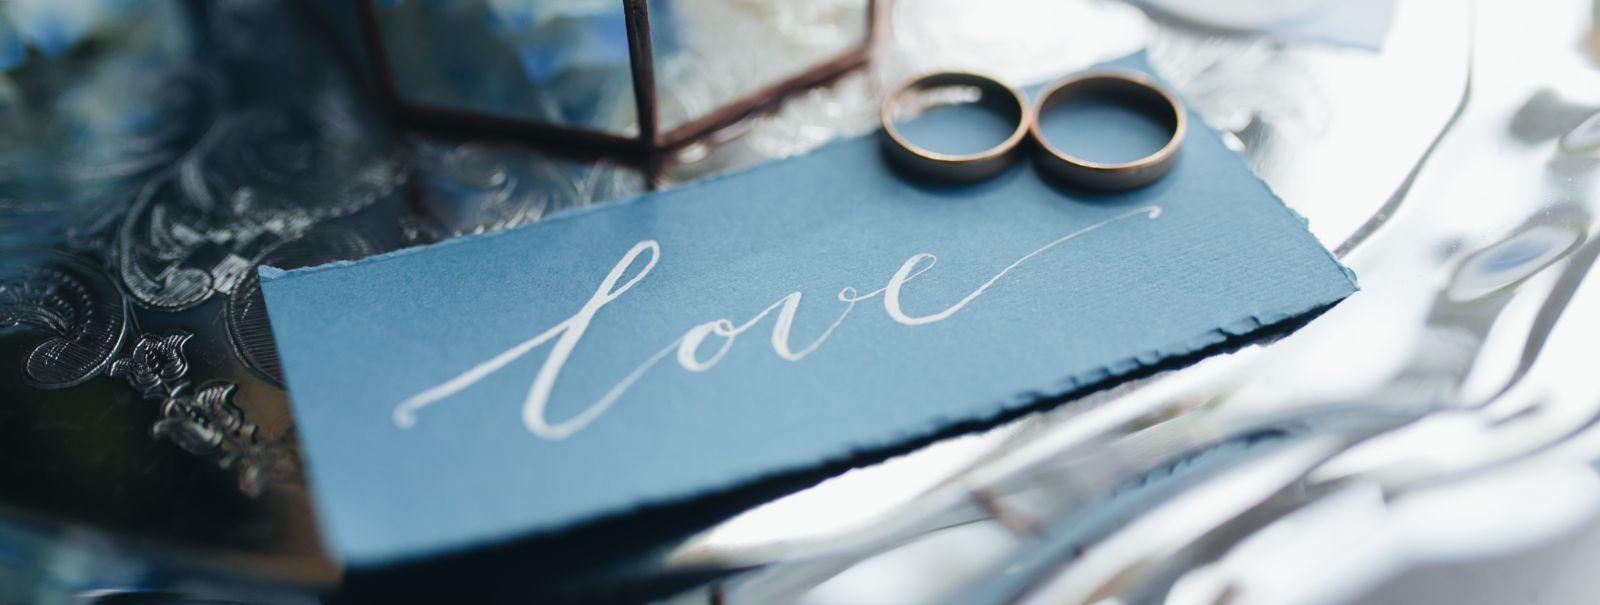 Weddings are a celebration of love and commitment, and your wedding invitations are the first glimpse your guests will have into the style and theme of your spe